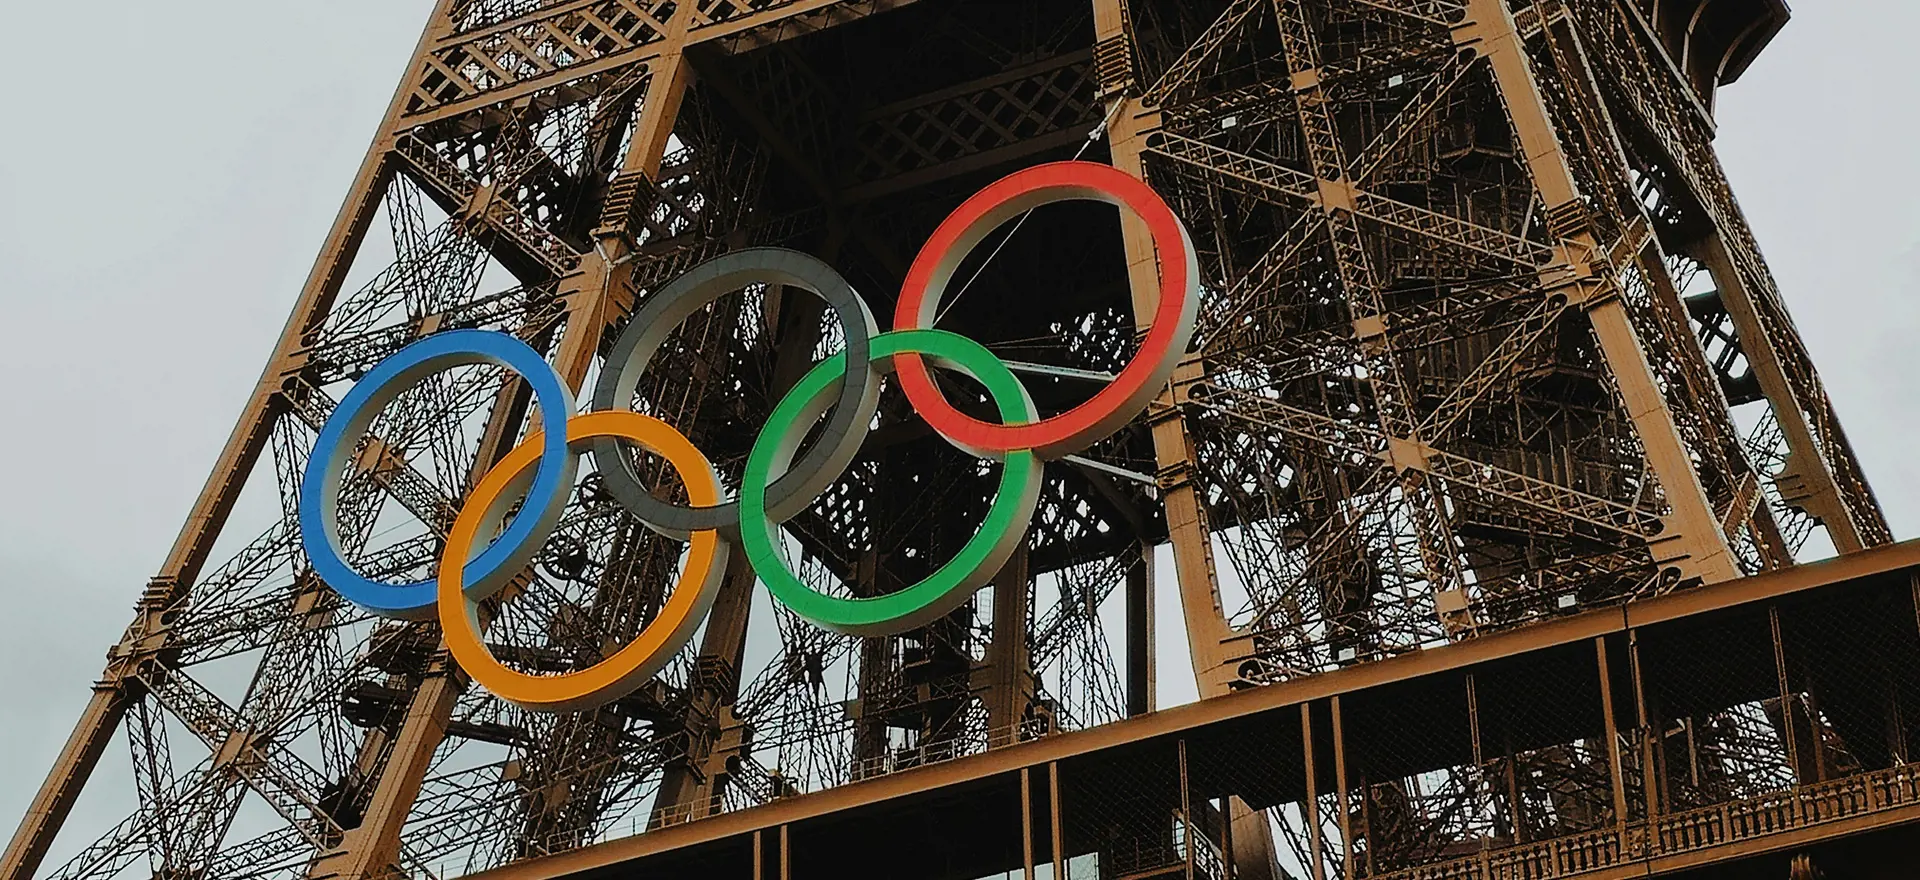 Town planning… an Olympic sport